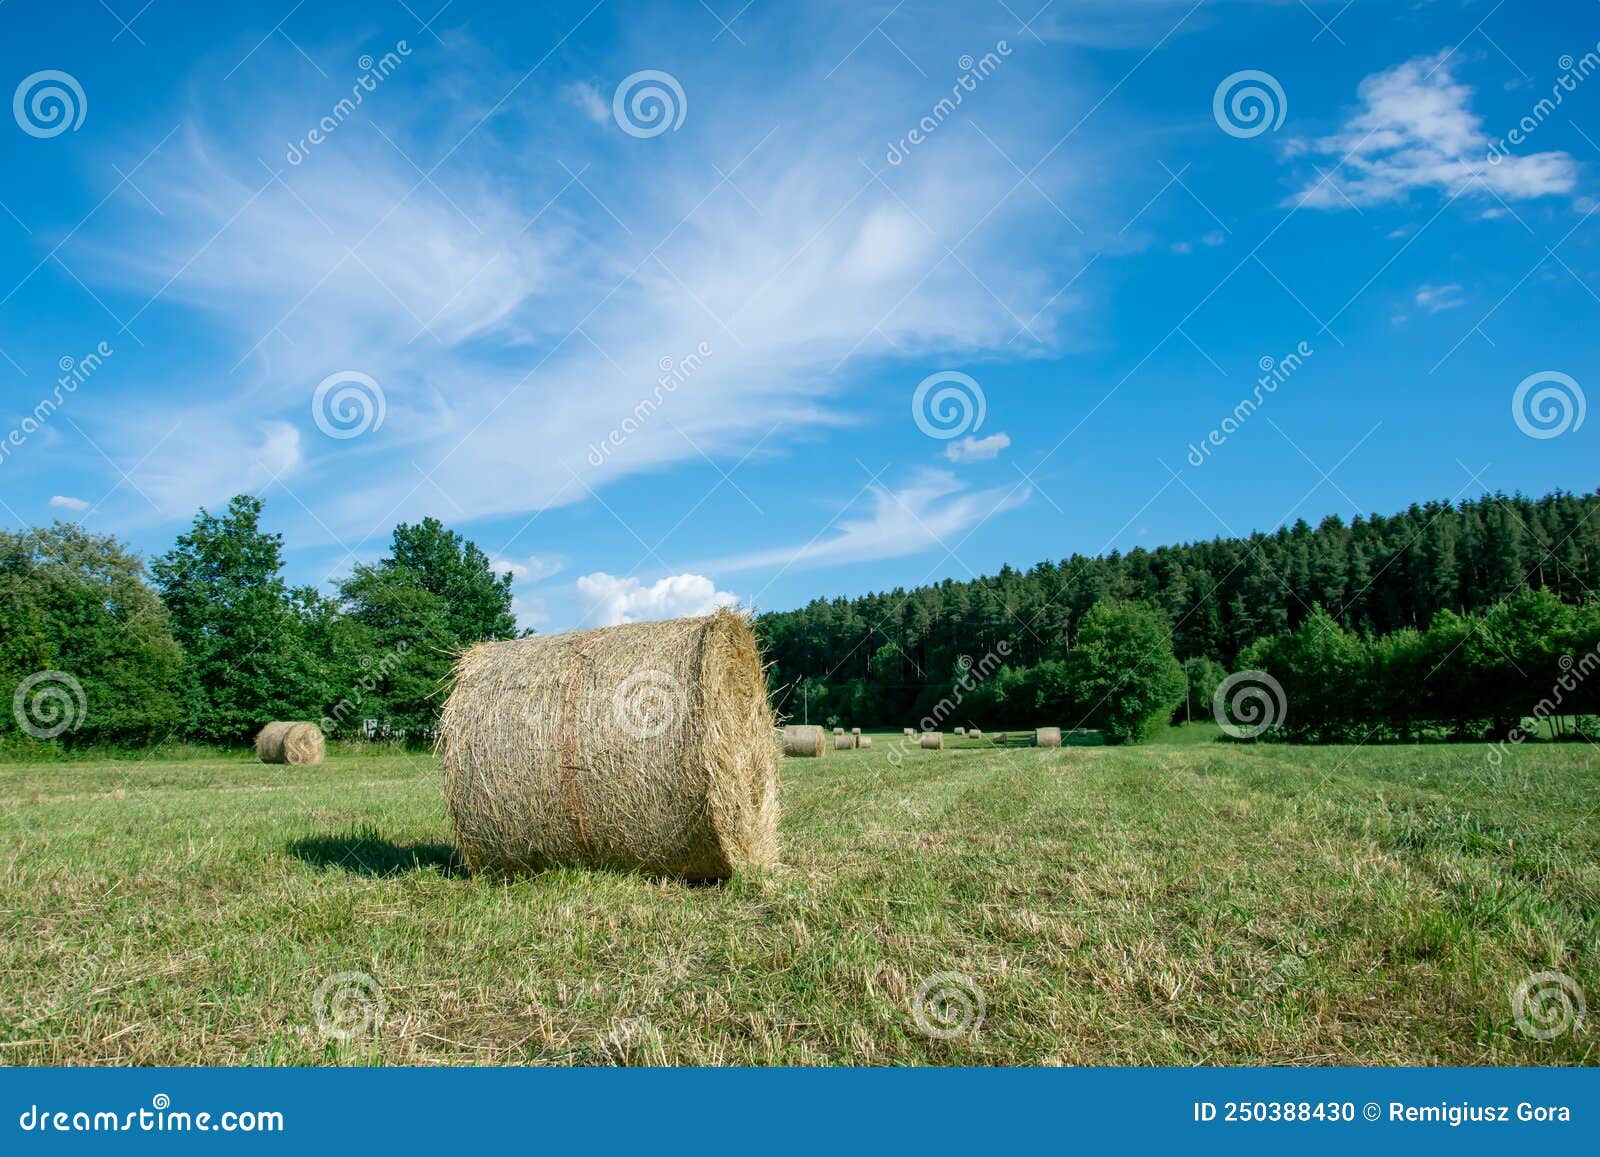 Hay Bale On The Meadow Stock Photo Image Of Grain Field 250388430